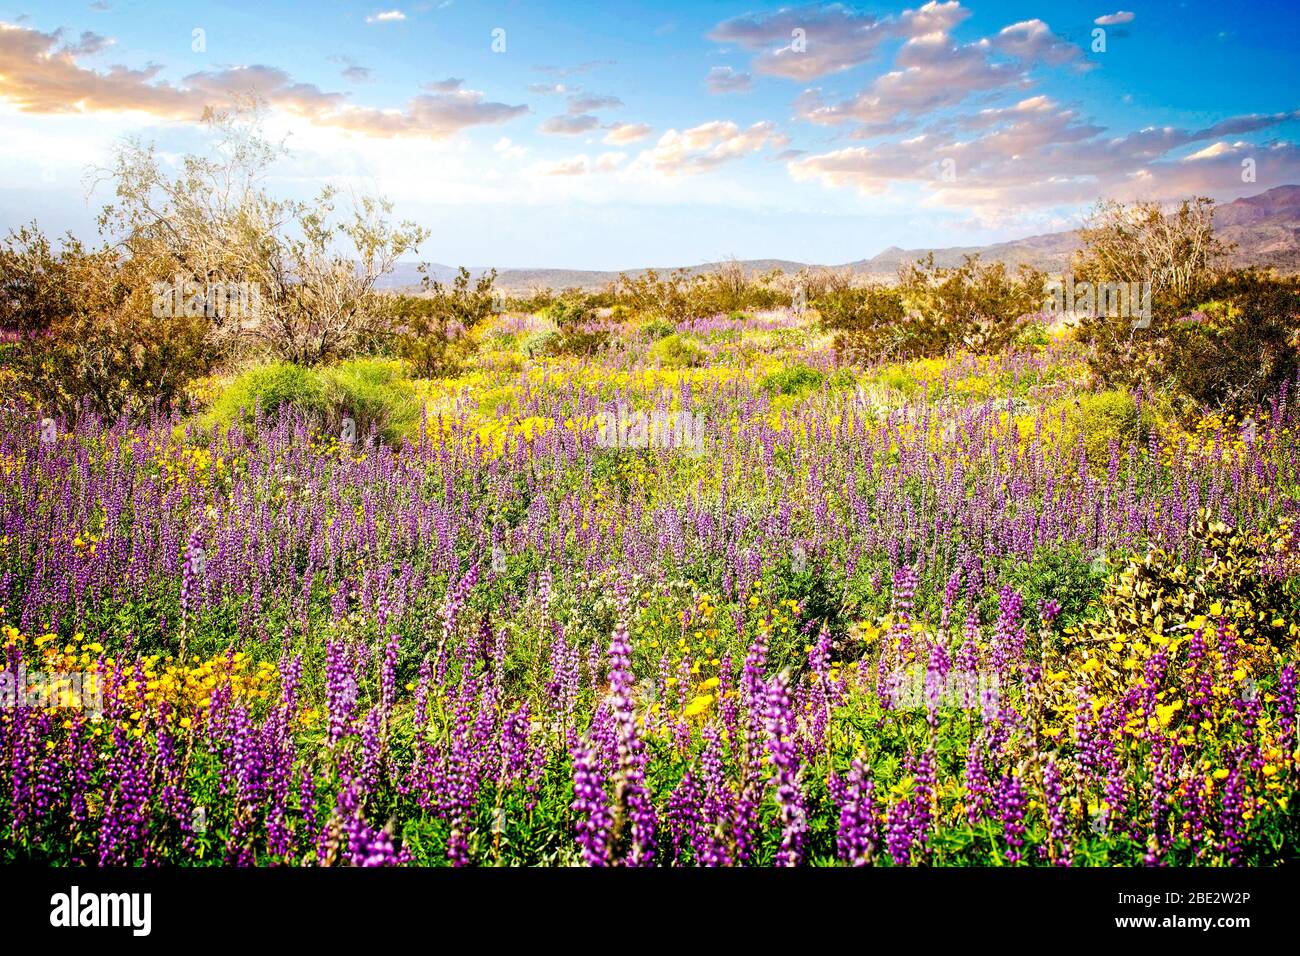 Spring wildflowers bloom in the lower elevations of Joshua Tree National Park, California. Stock Photo